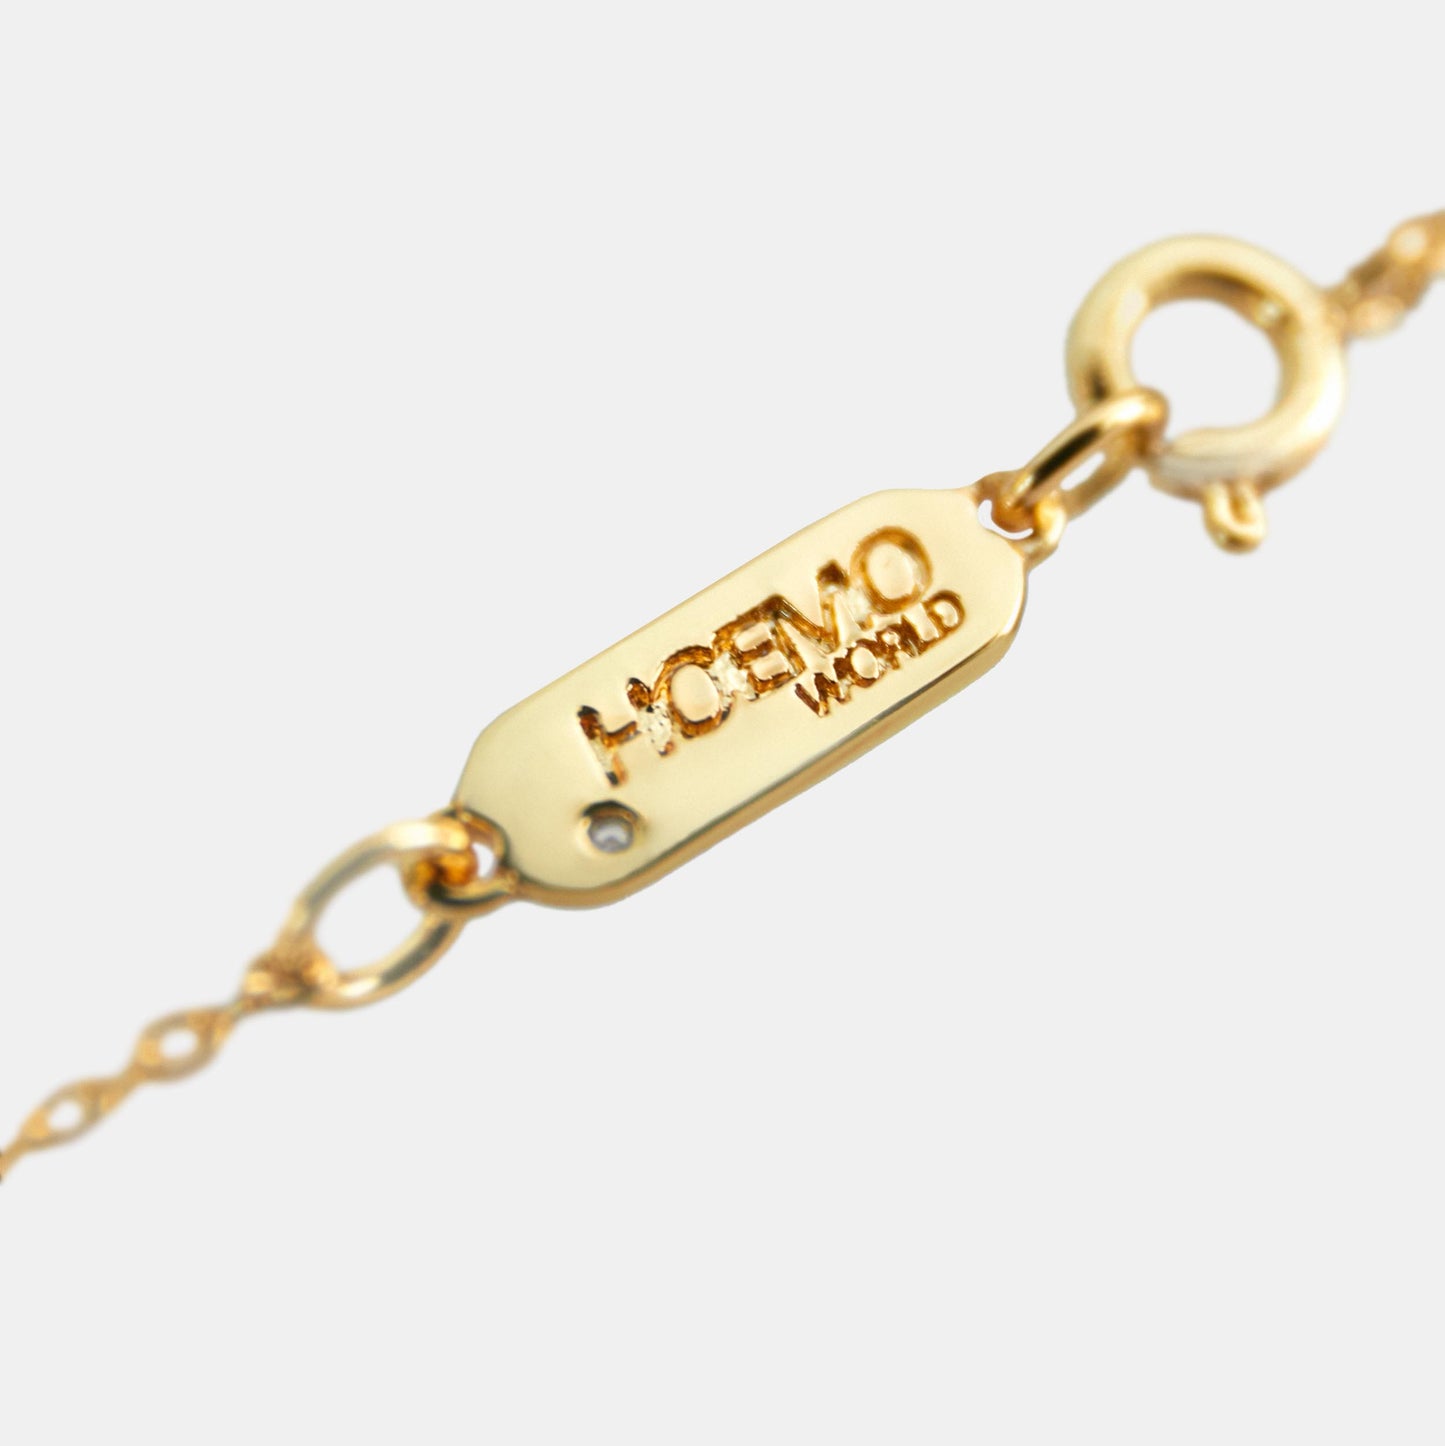 POPPERS GOLD PENDANT NECKLACE